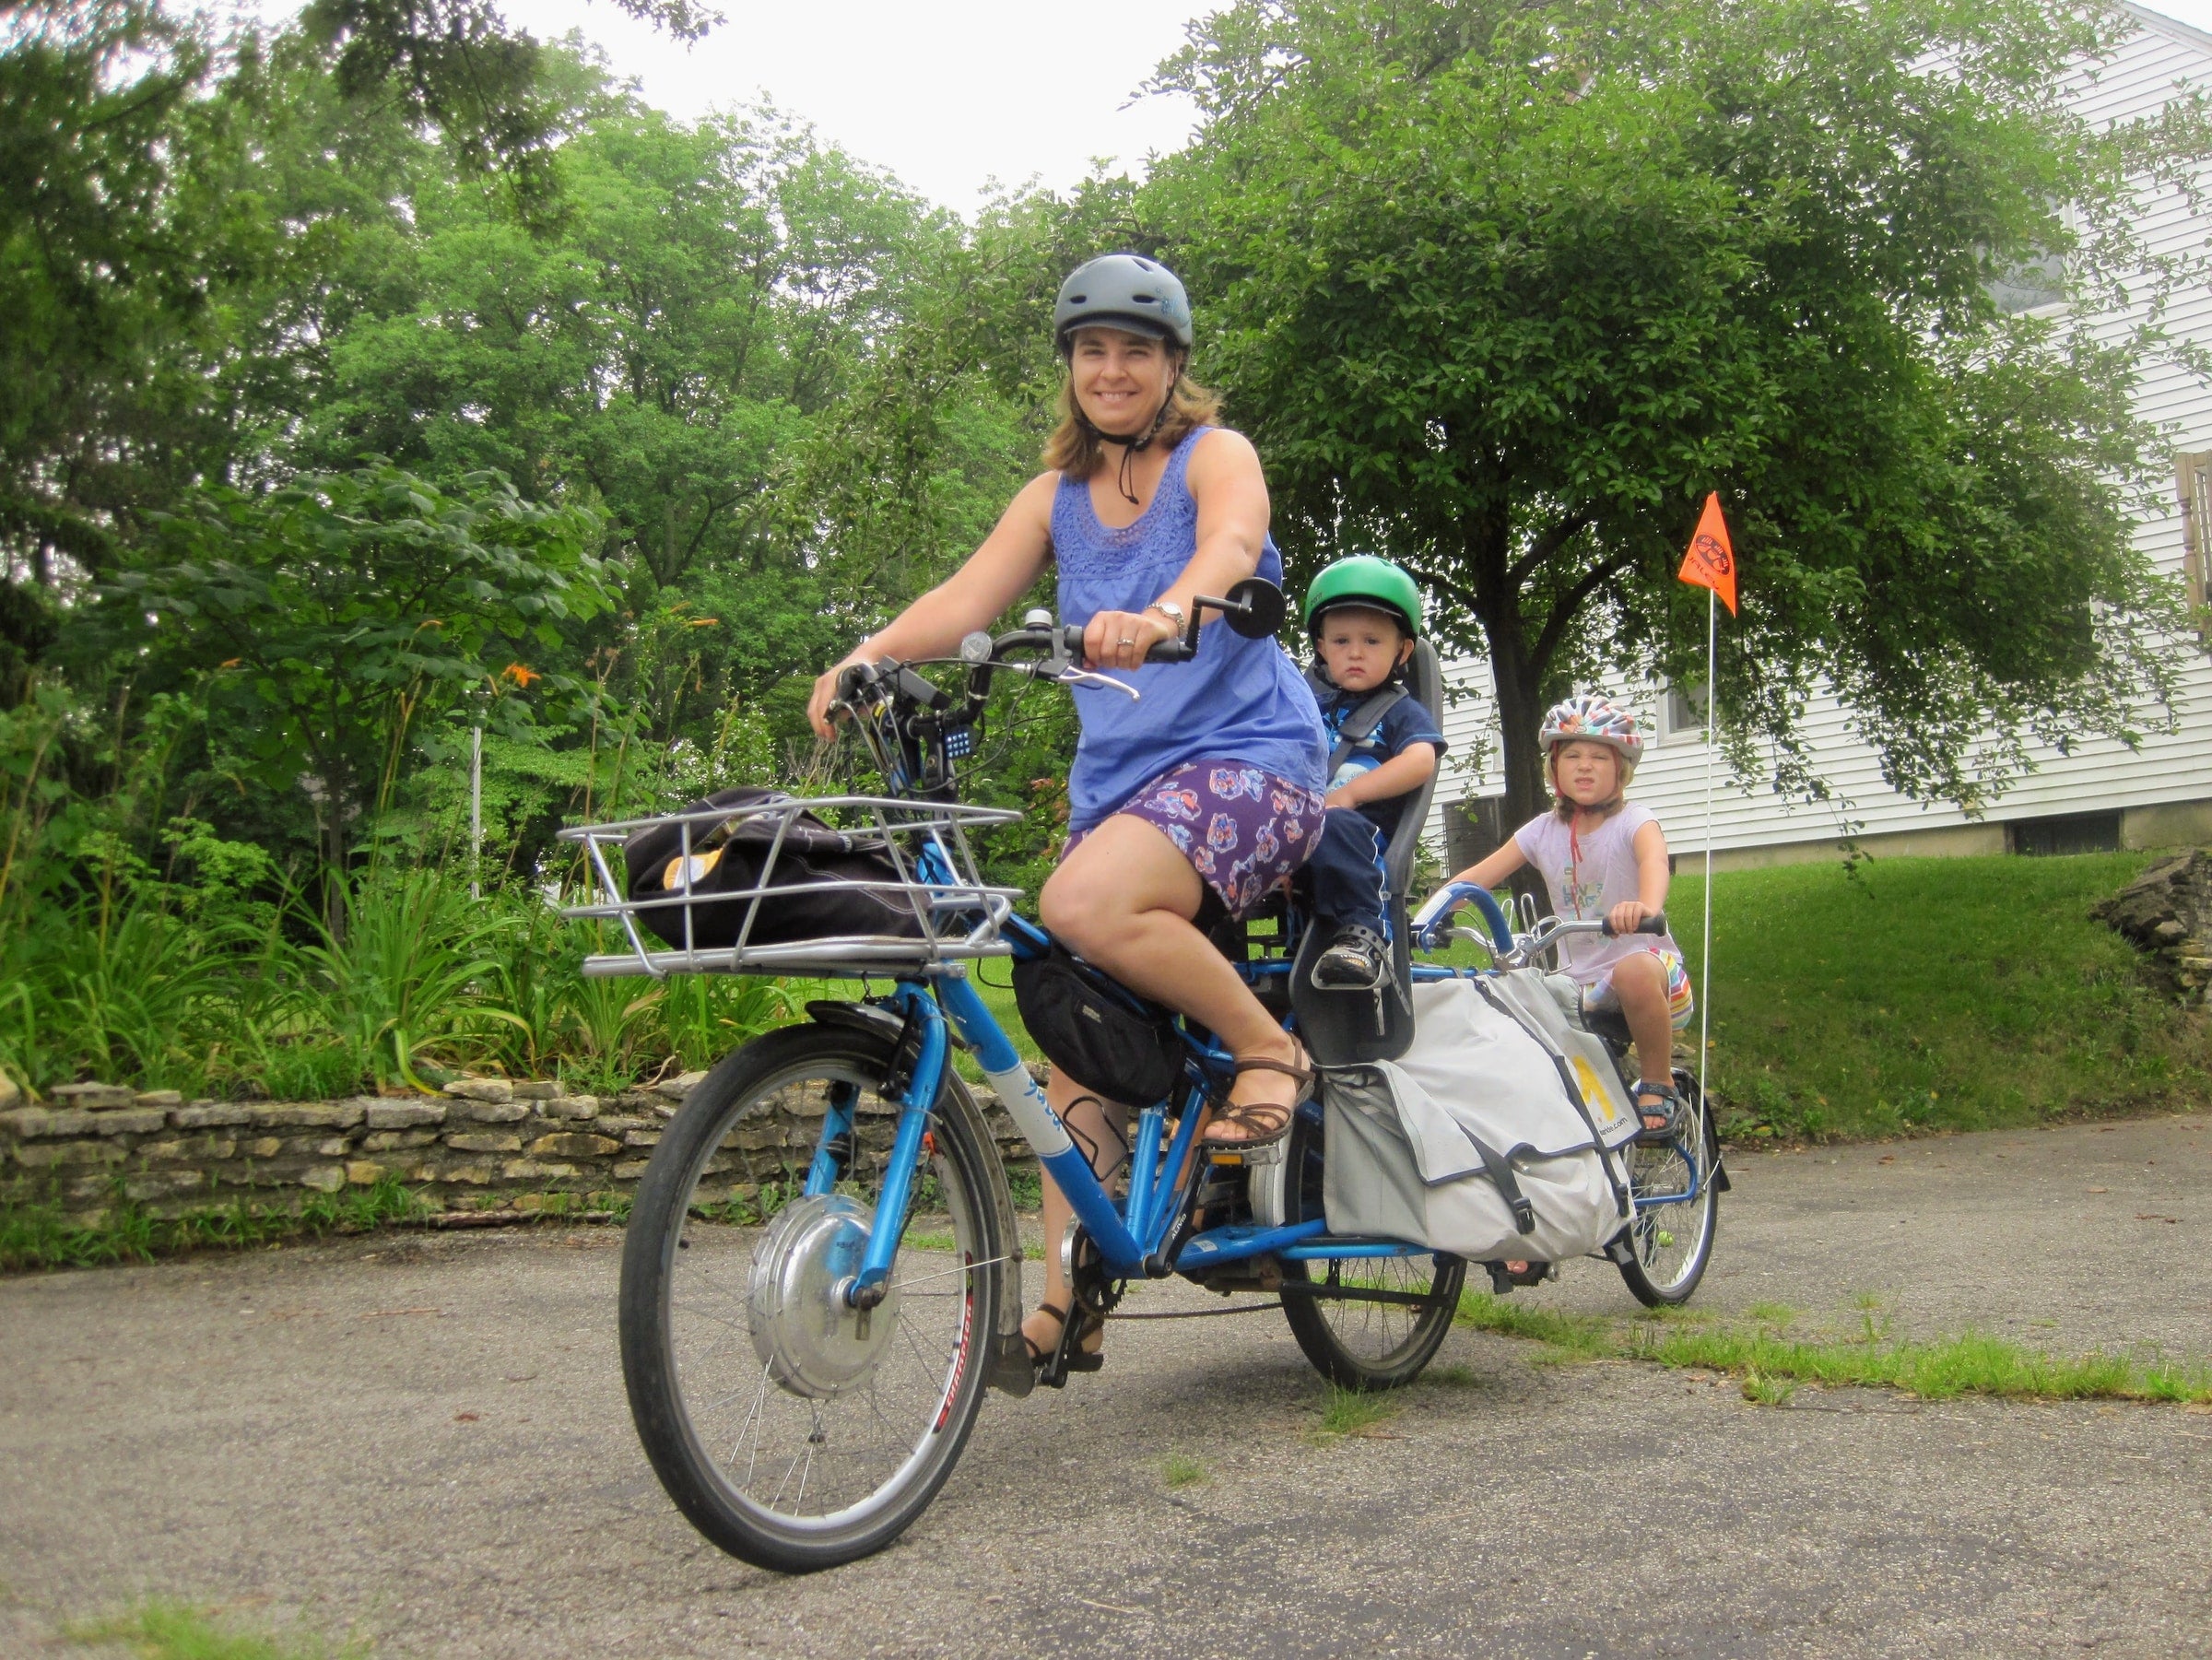 mother riding a bike with her kids